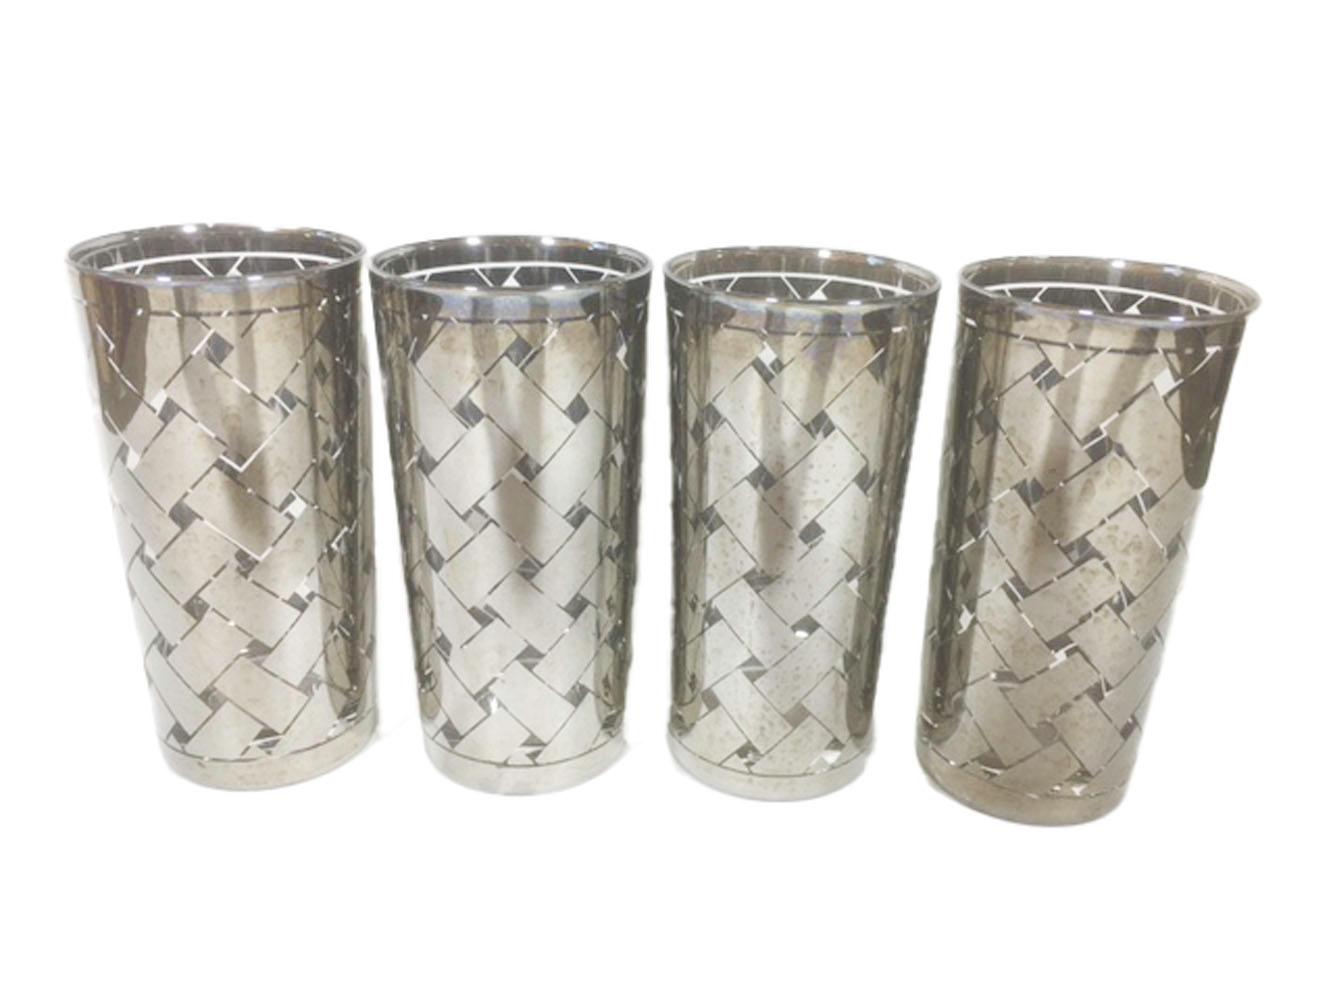 American Vintage Highball Glasses in a Graphic Silver Basket Weave Pattern For Sale